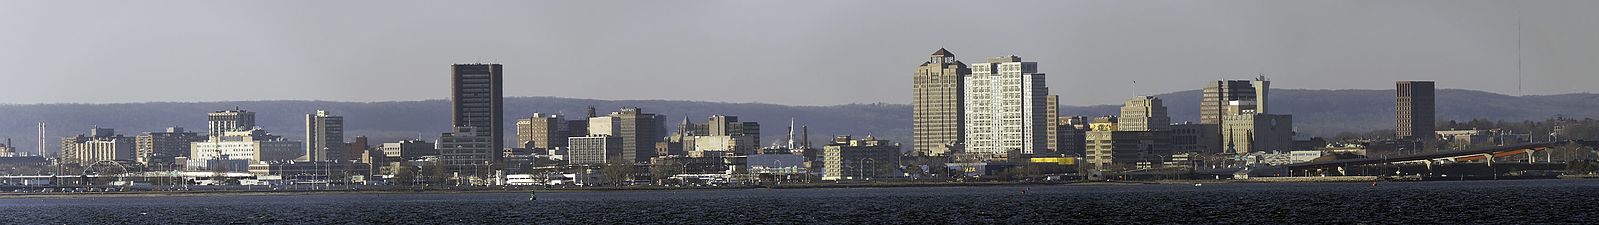 List Of Cities In New England By Population